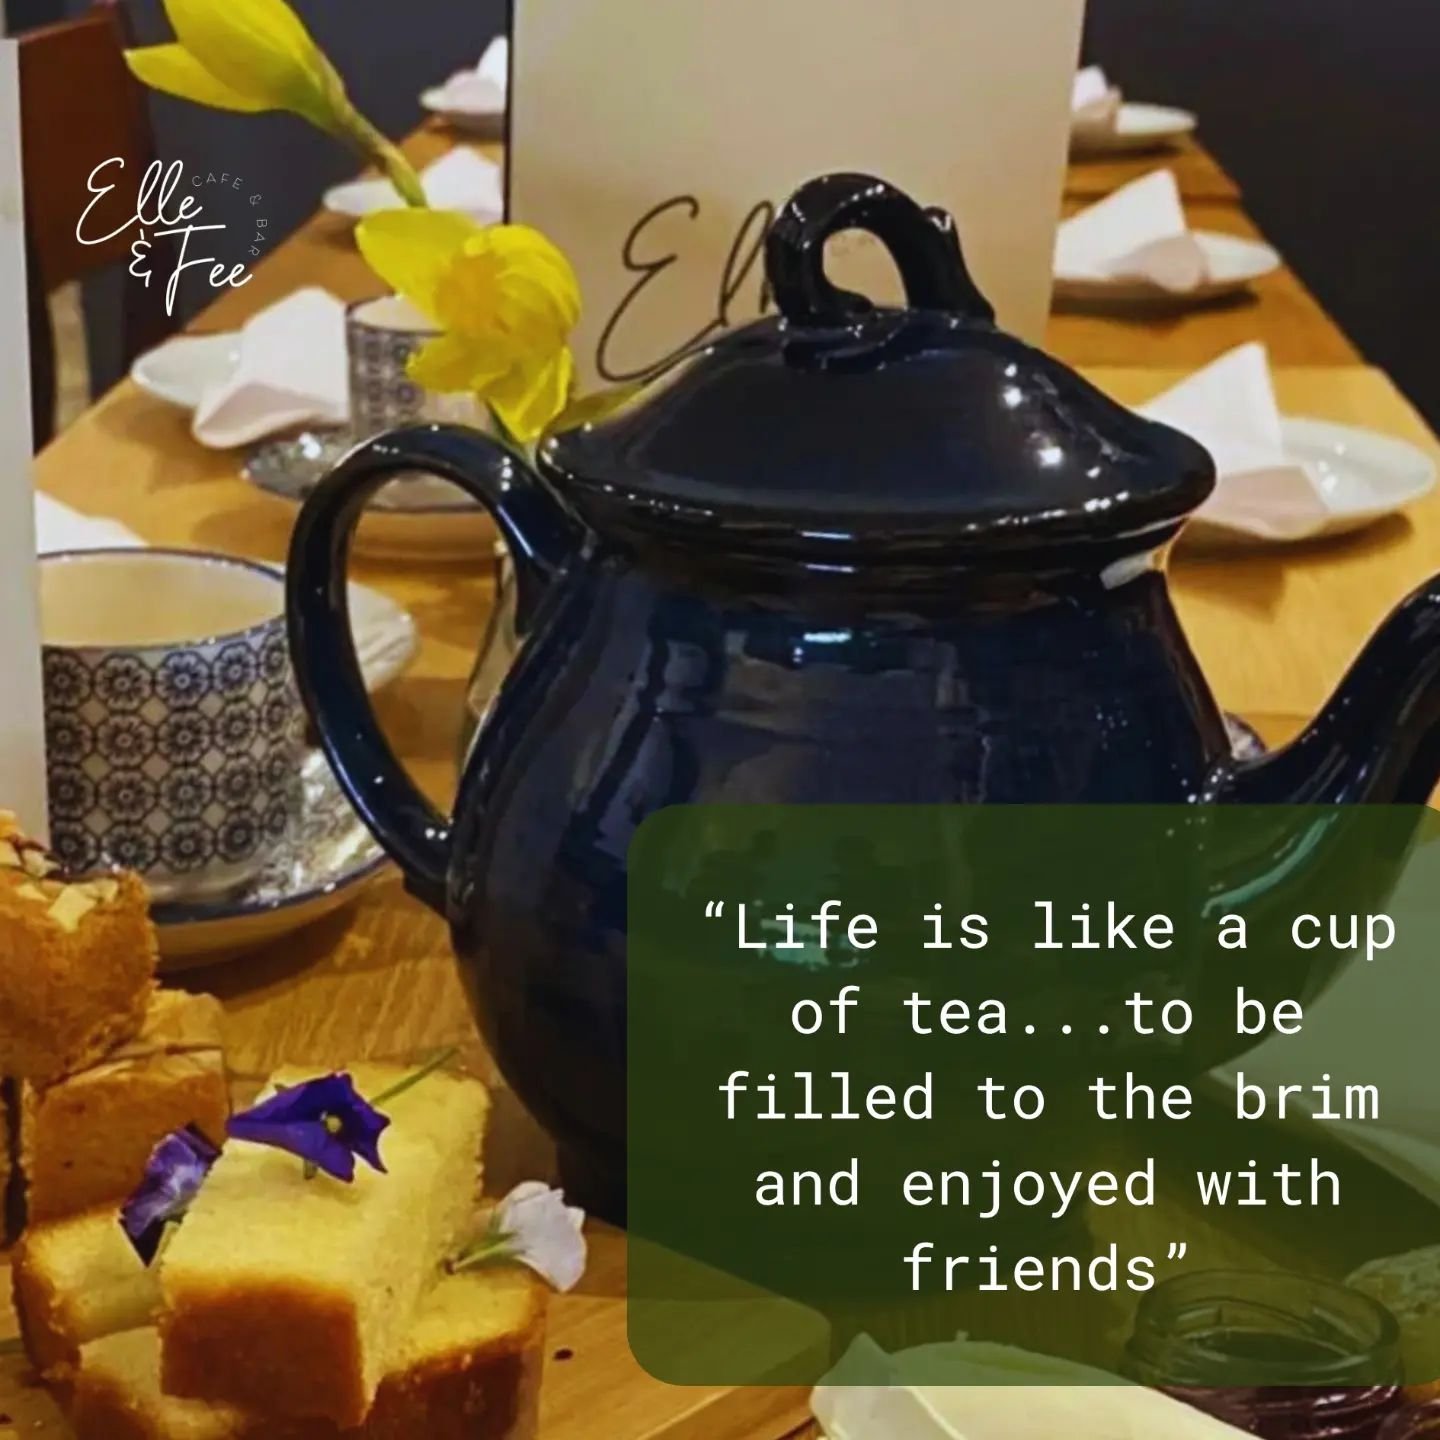 &quot;Life is like a cup of tea...to be filled to the brim and enjoyed with friends&quot;

Yesterday was National Tea Day so here is your motivation to have the perfect brew surrounded by friends. 

#surreyrestaurant #surreycafe #surreybrunch #ashfor